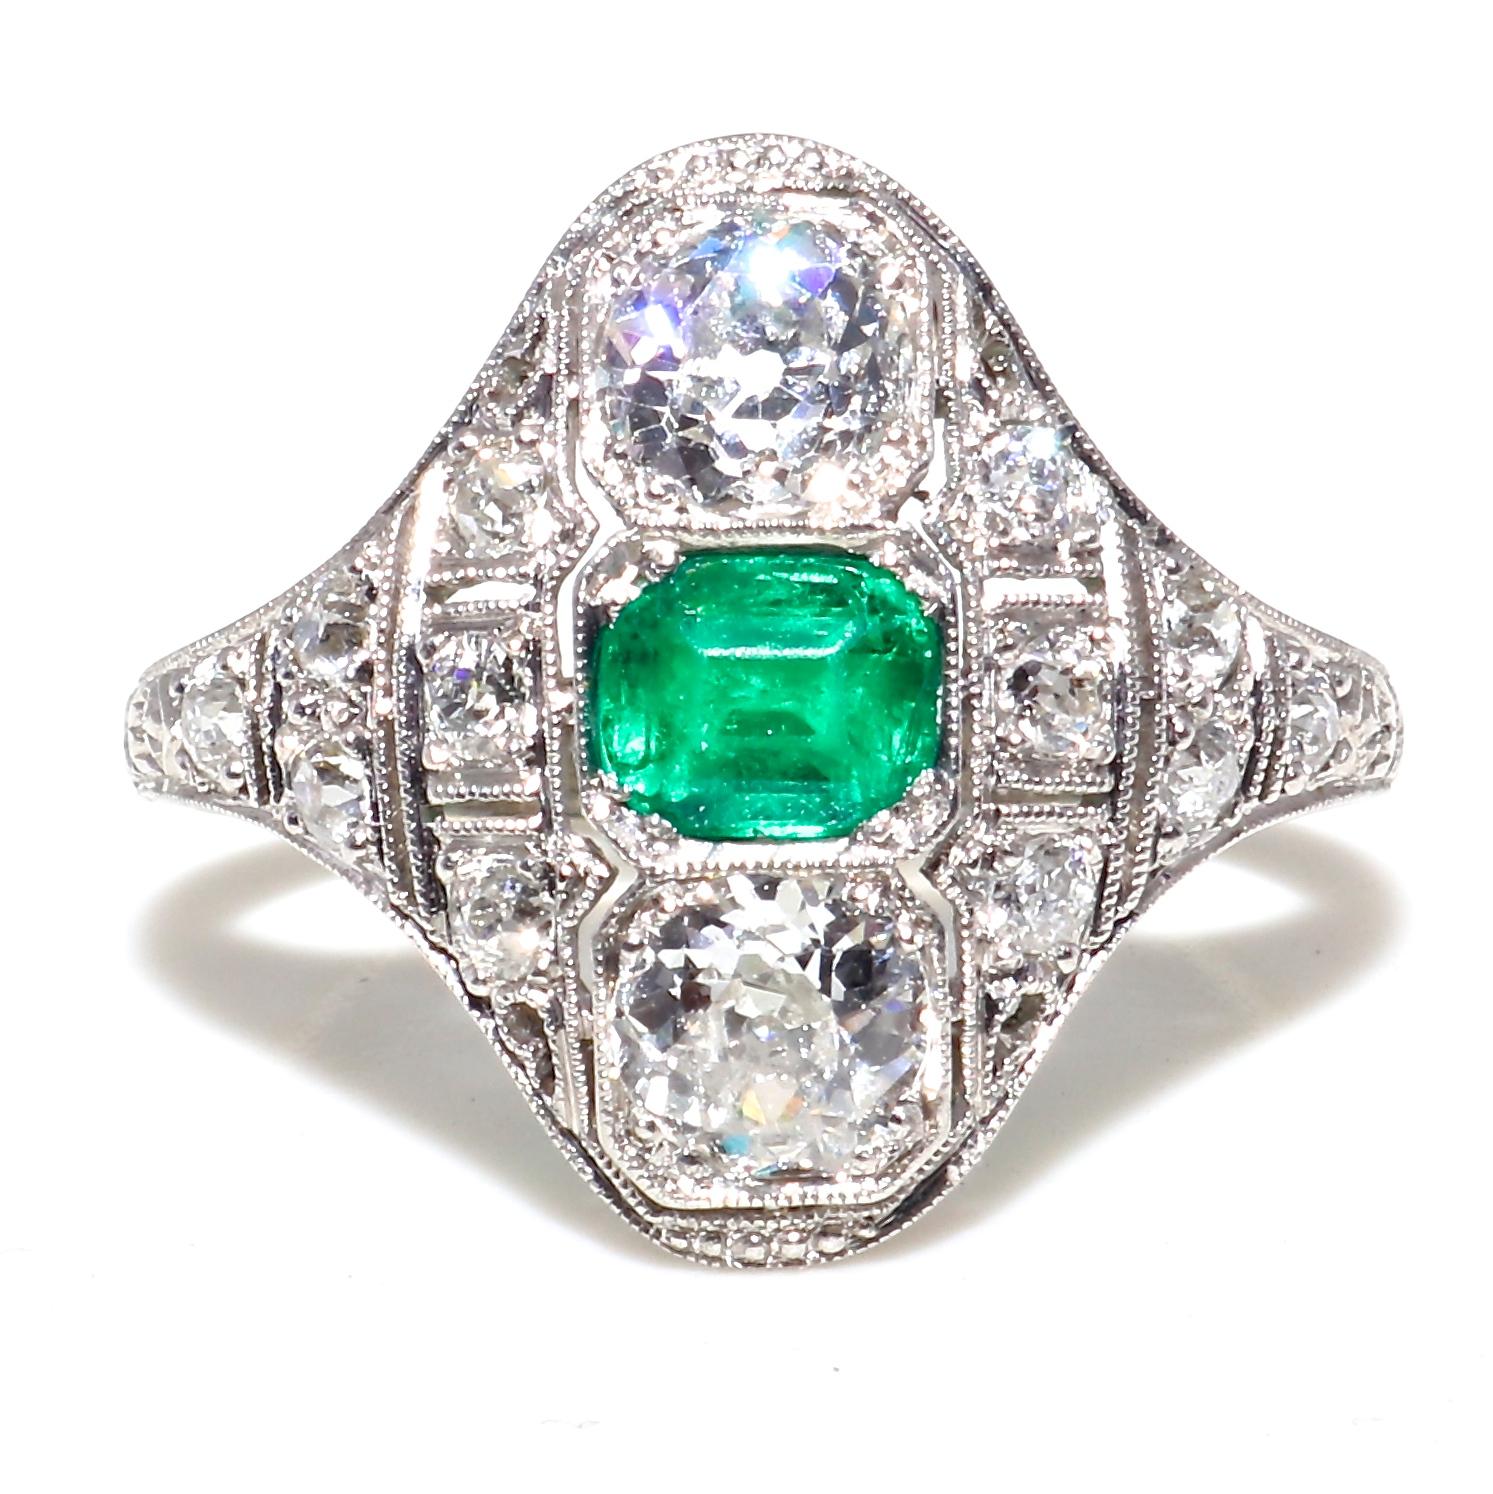 Stunning Art Deco emerald diamond platinum ring. Featuring an approximately 0.50 carat emerald cut emerald and 2 old European cut diamonds that weigh approximately 0.40 carats each, graded F-G color, SI clarity. With 12 old European cut diamonds